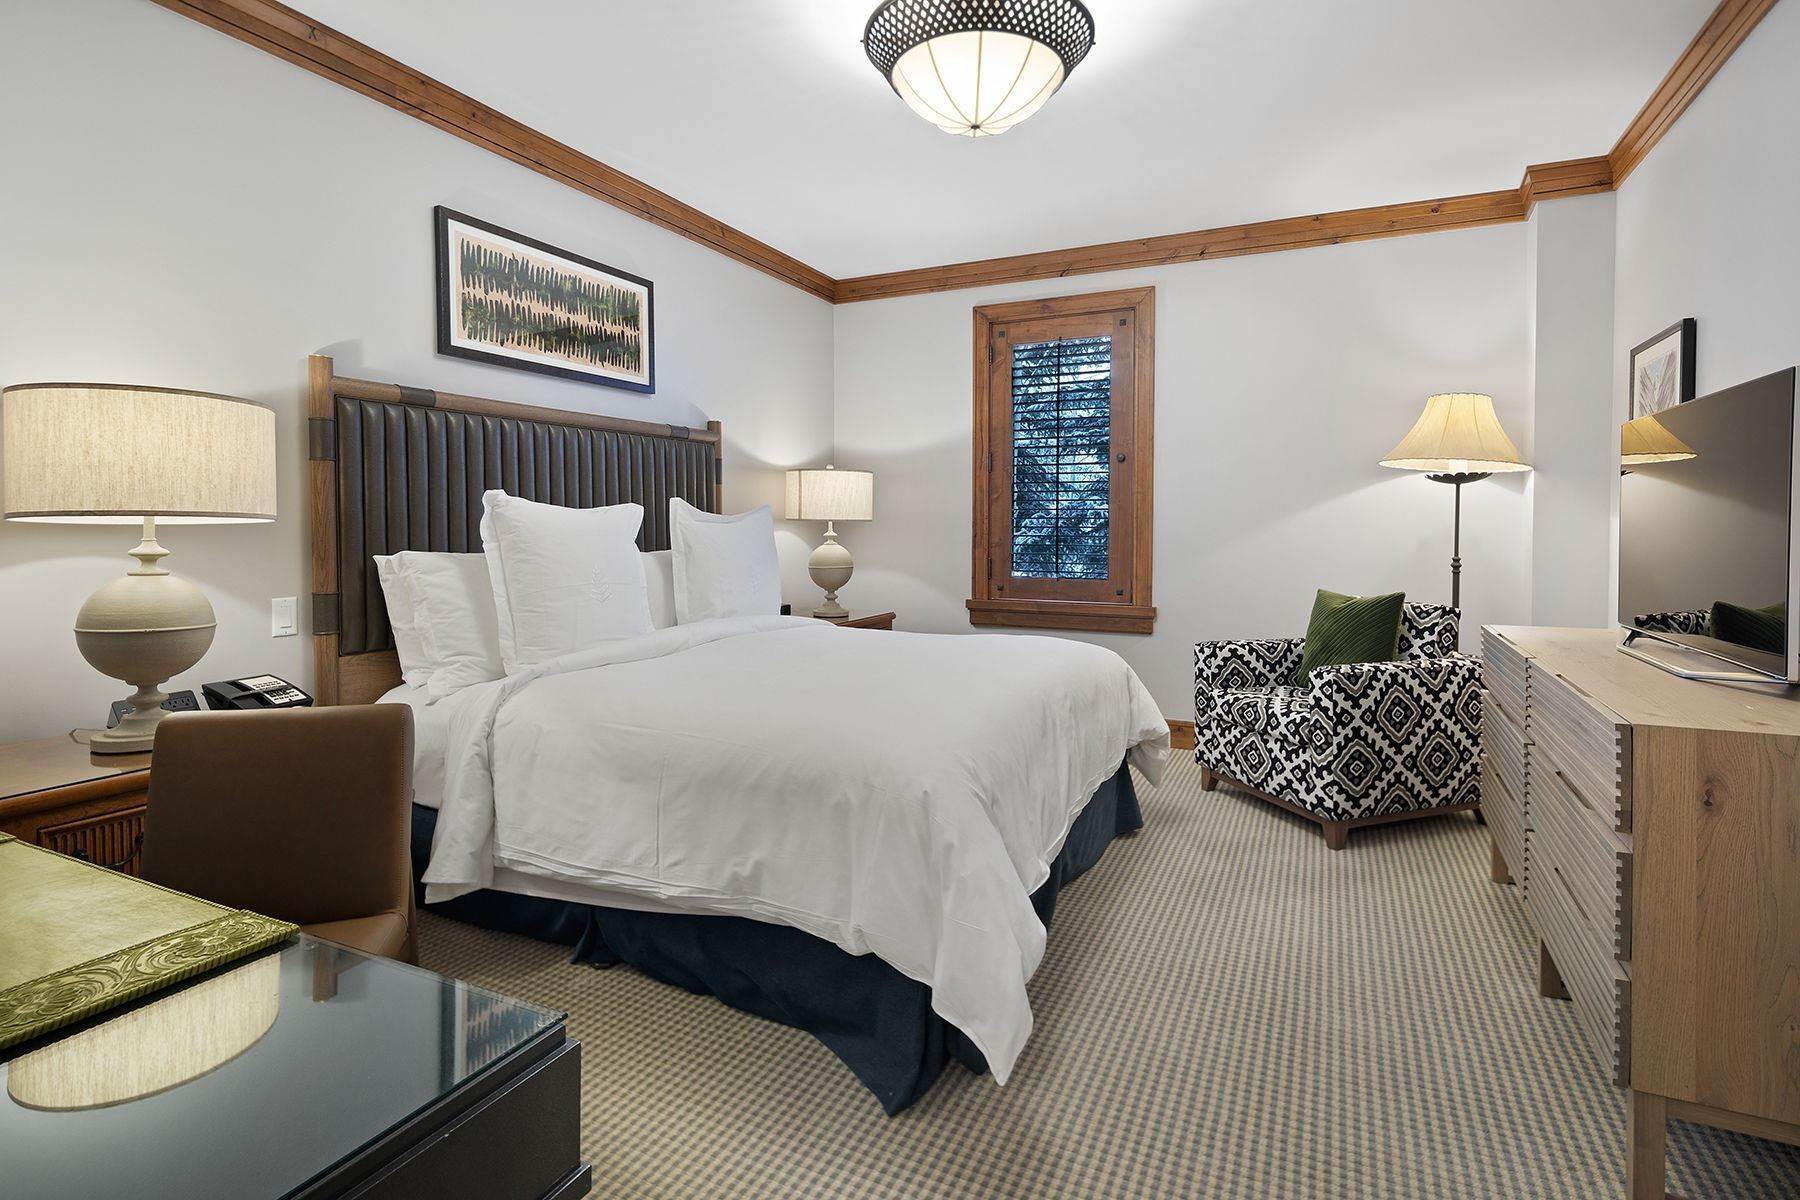 14. Fractional Ownership Property for Sale at Residence Club at the Four Seasons 7680 Granite Loop Road, #651 Teton Village, Wyoming 83025 United States